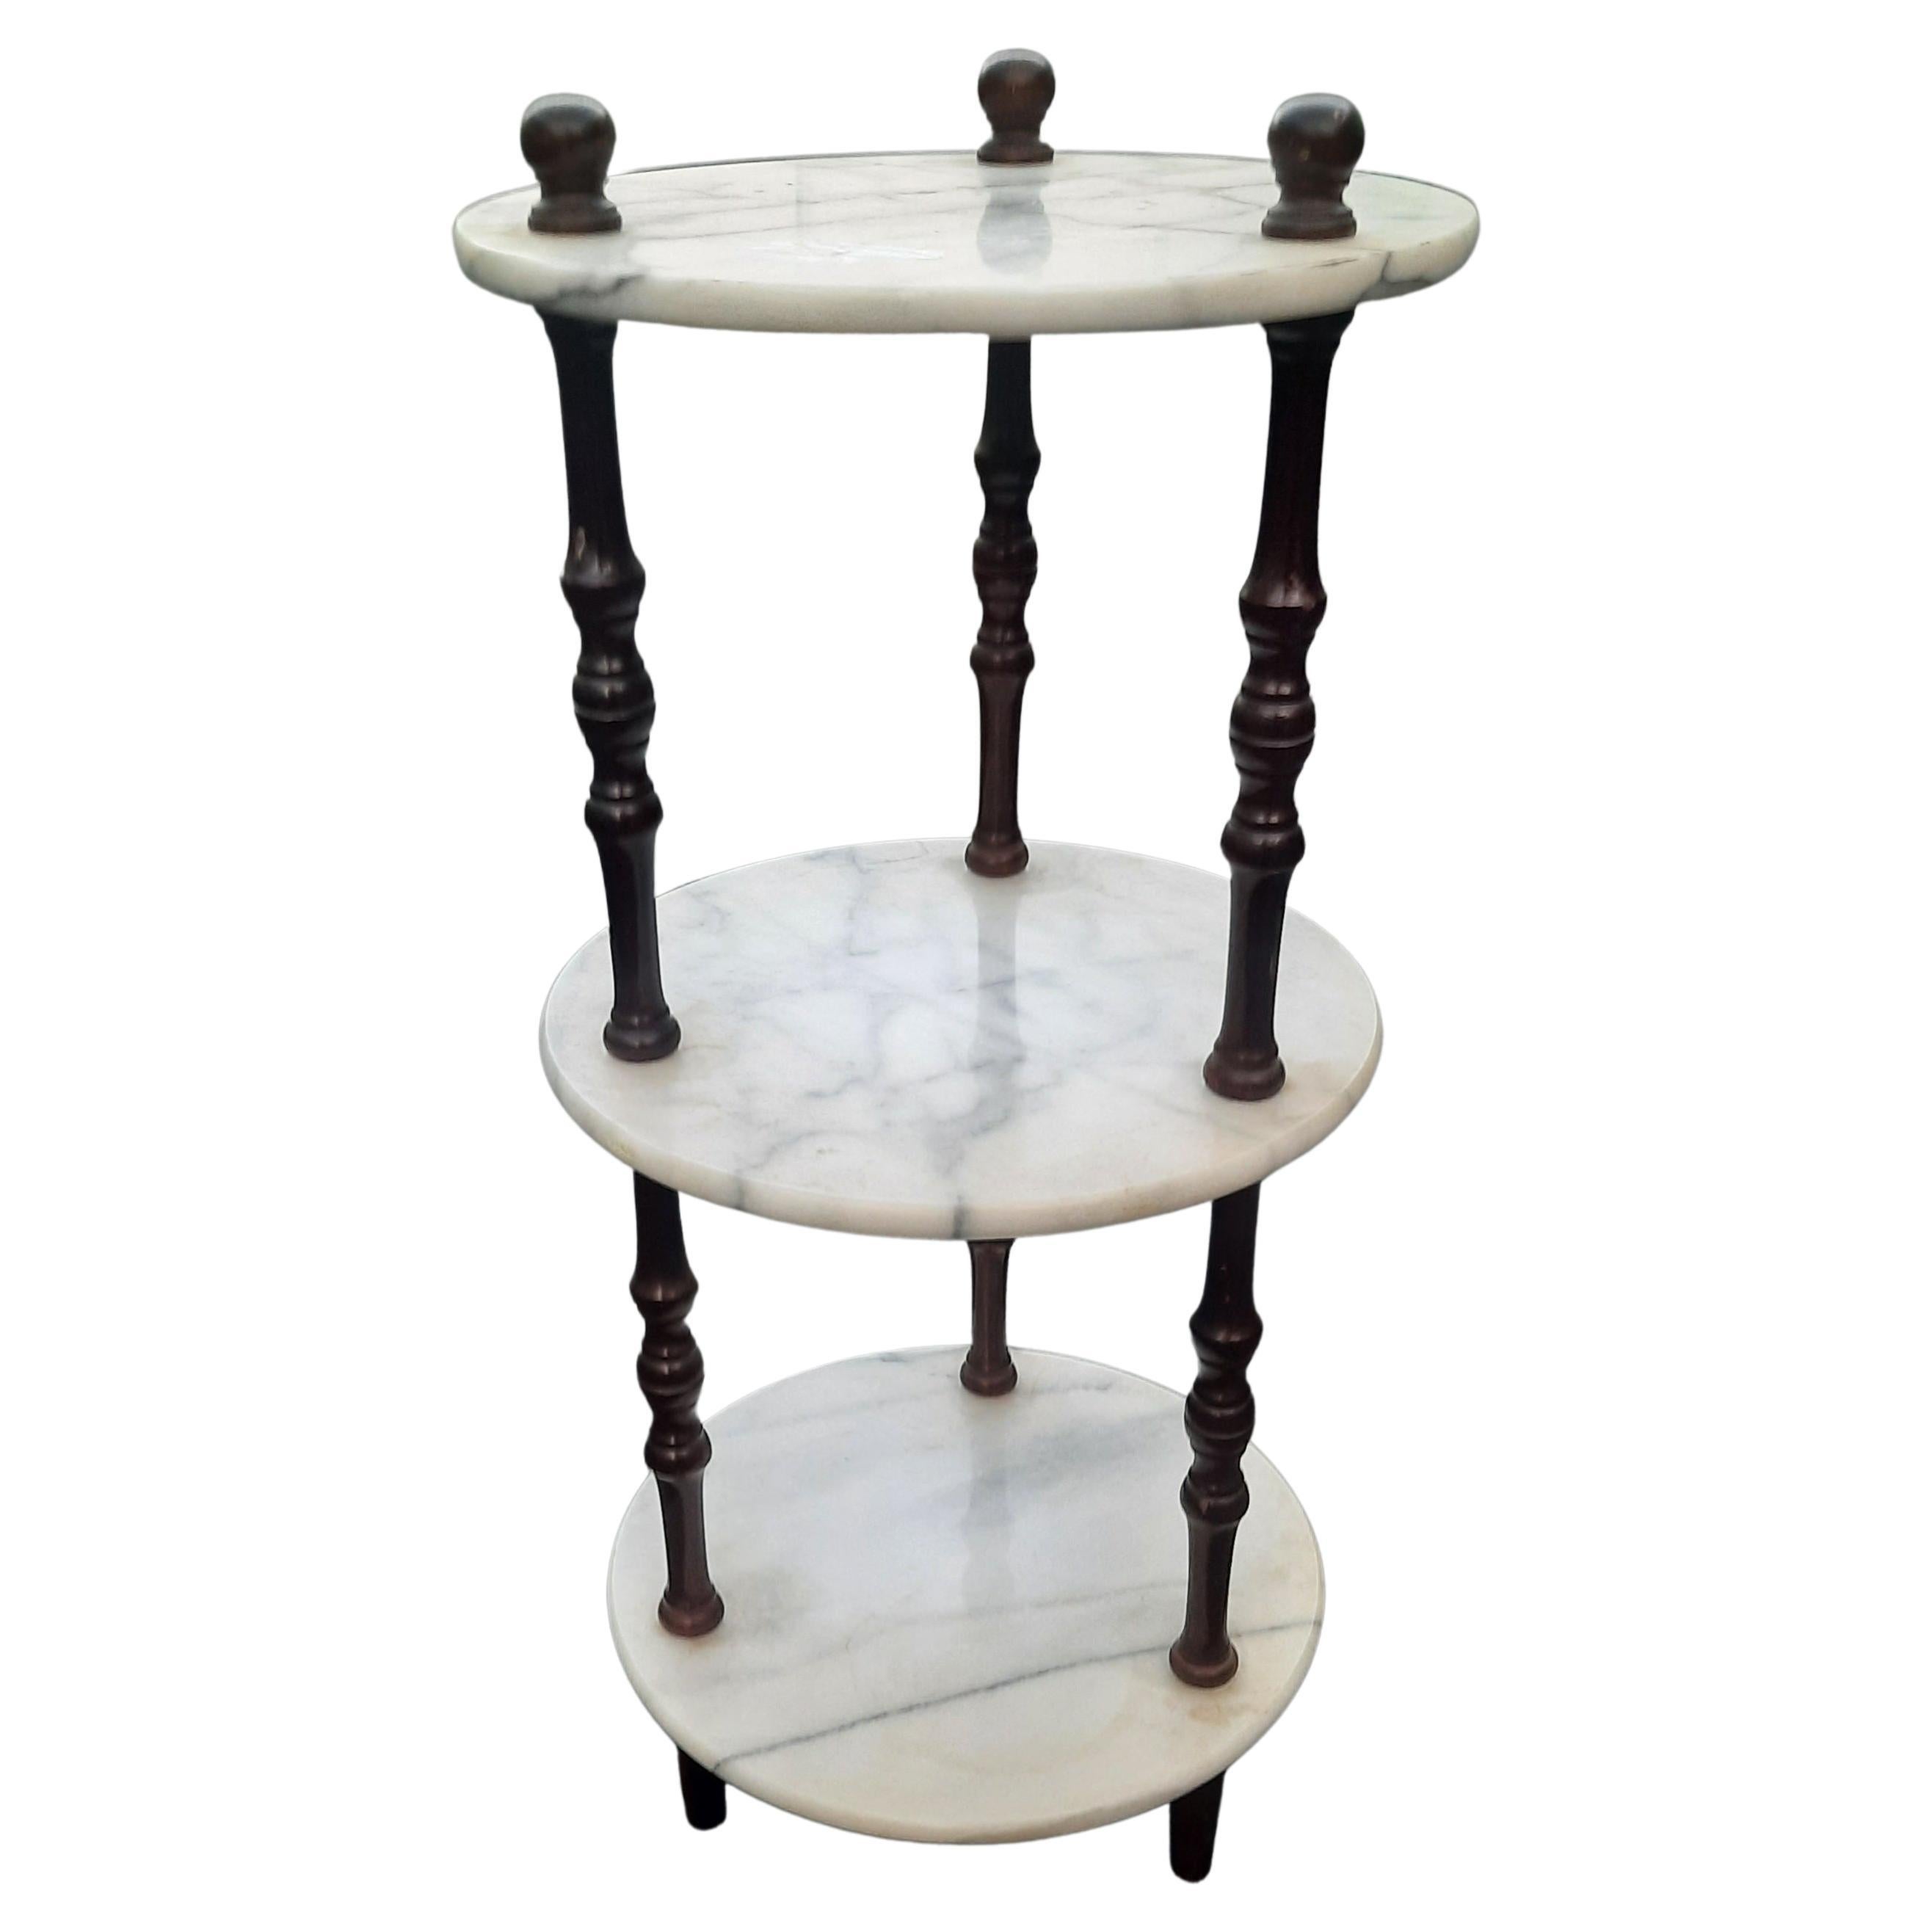 Cute Three-Tier Mahogany And Marble Side Table 
Measures 12